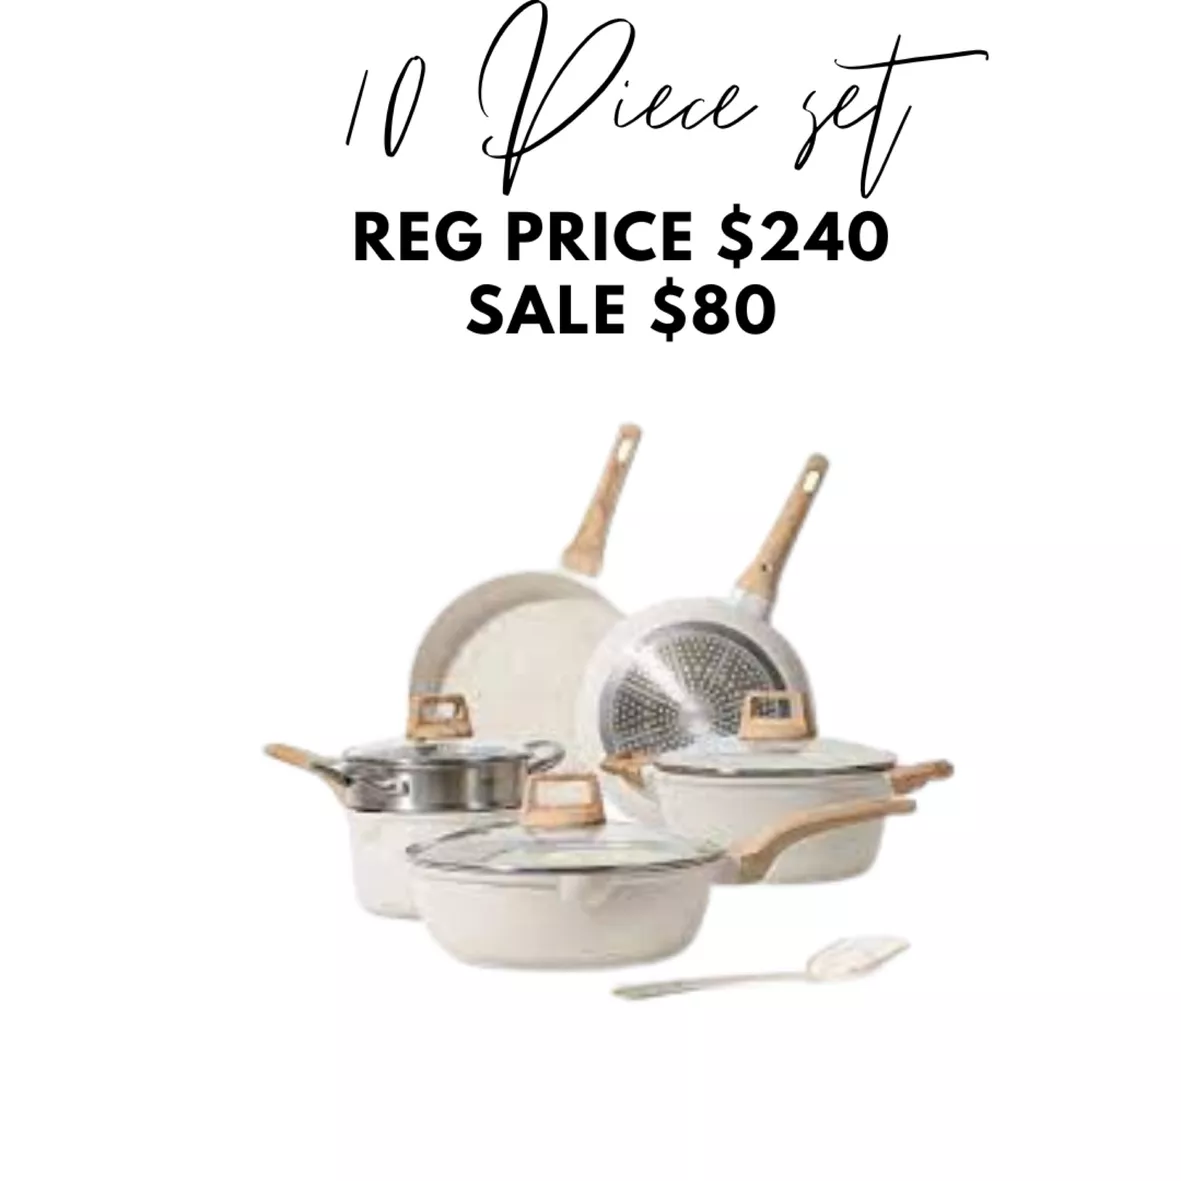 Walmart Carote cookware deal: Get a $240 Carote cookware set for under $70  - Reviewed